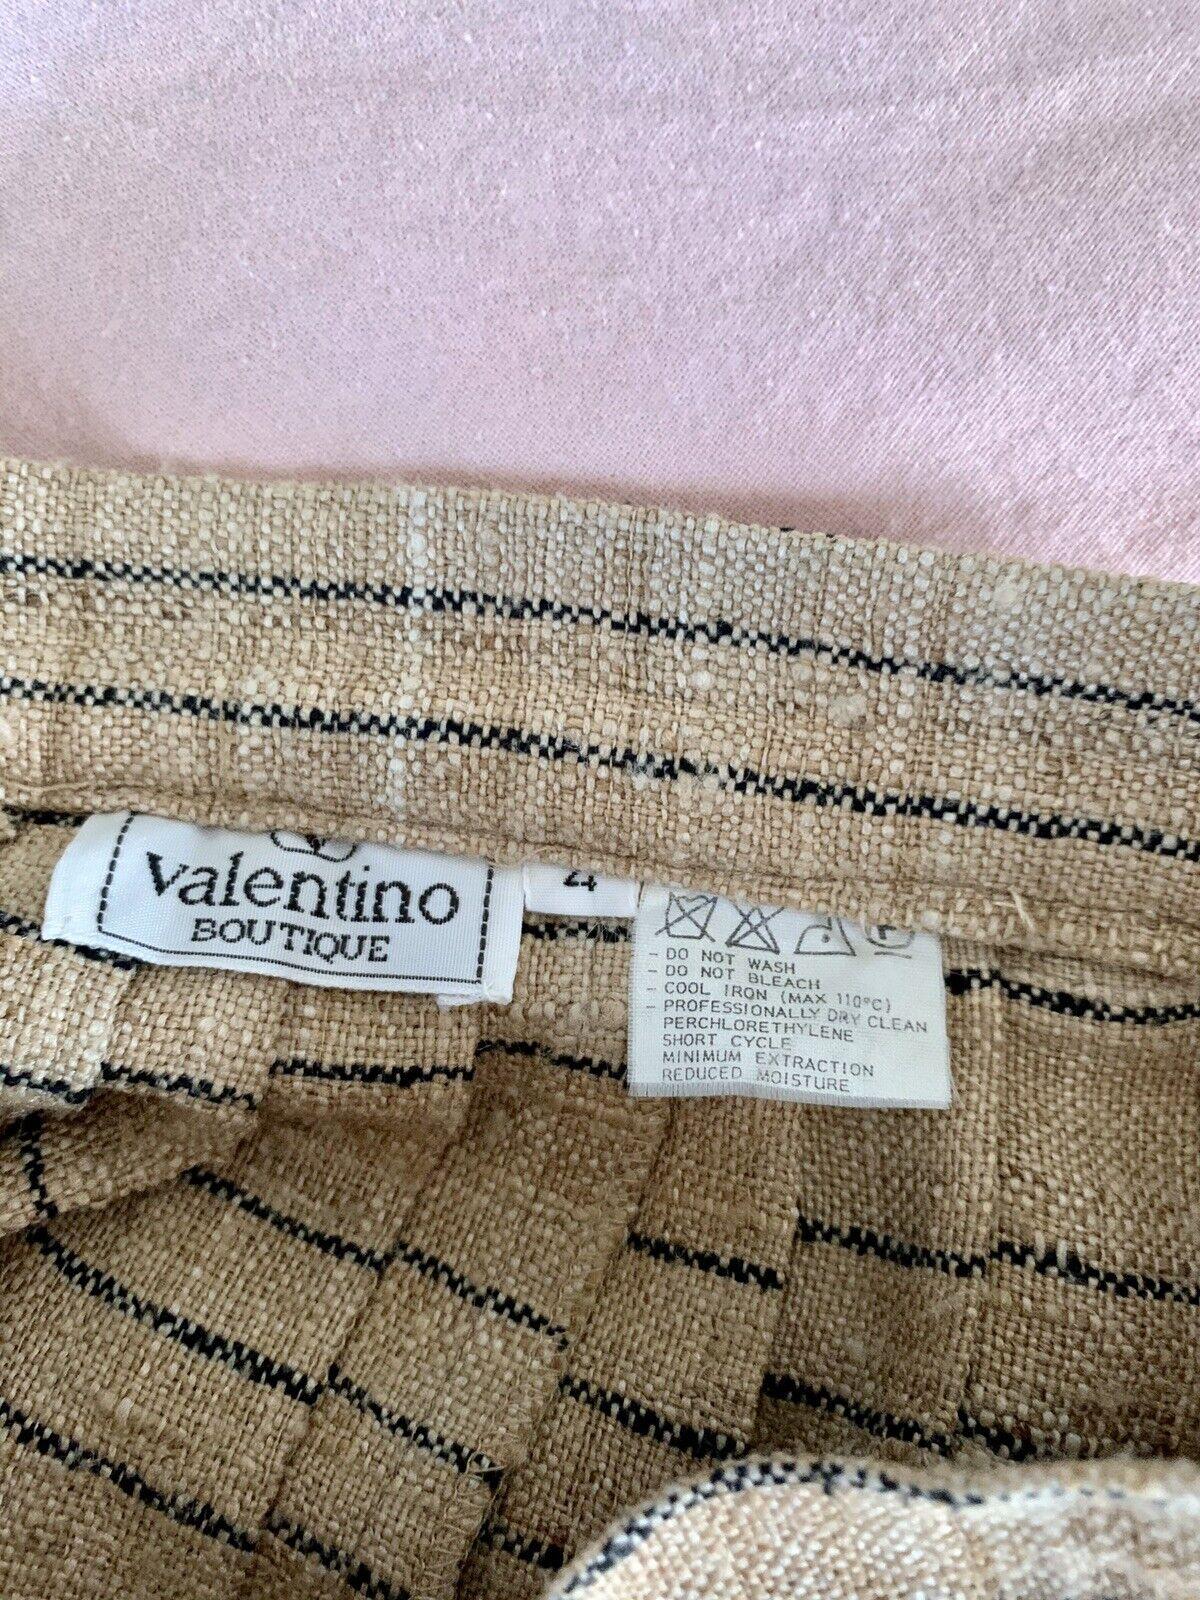 Vintage VALENTINO Boutique Couture Two Piece Ensemble Skirt Top 8 For Sale 8